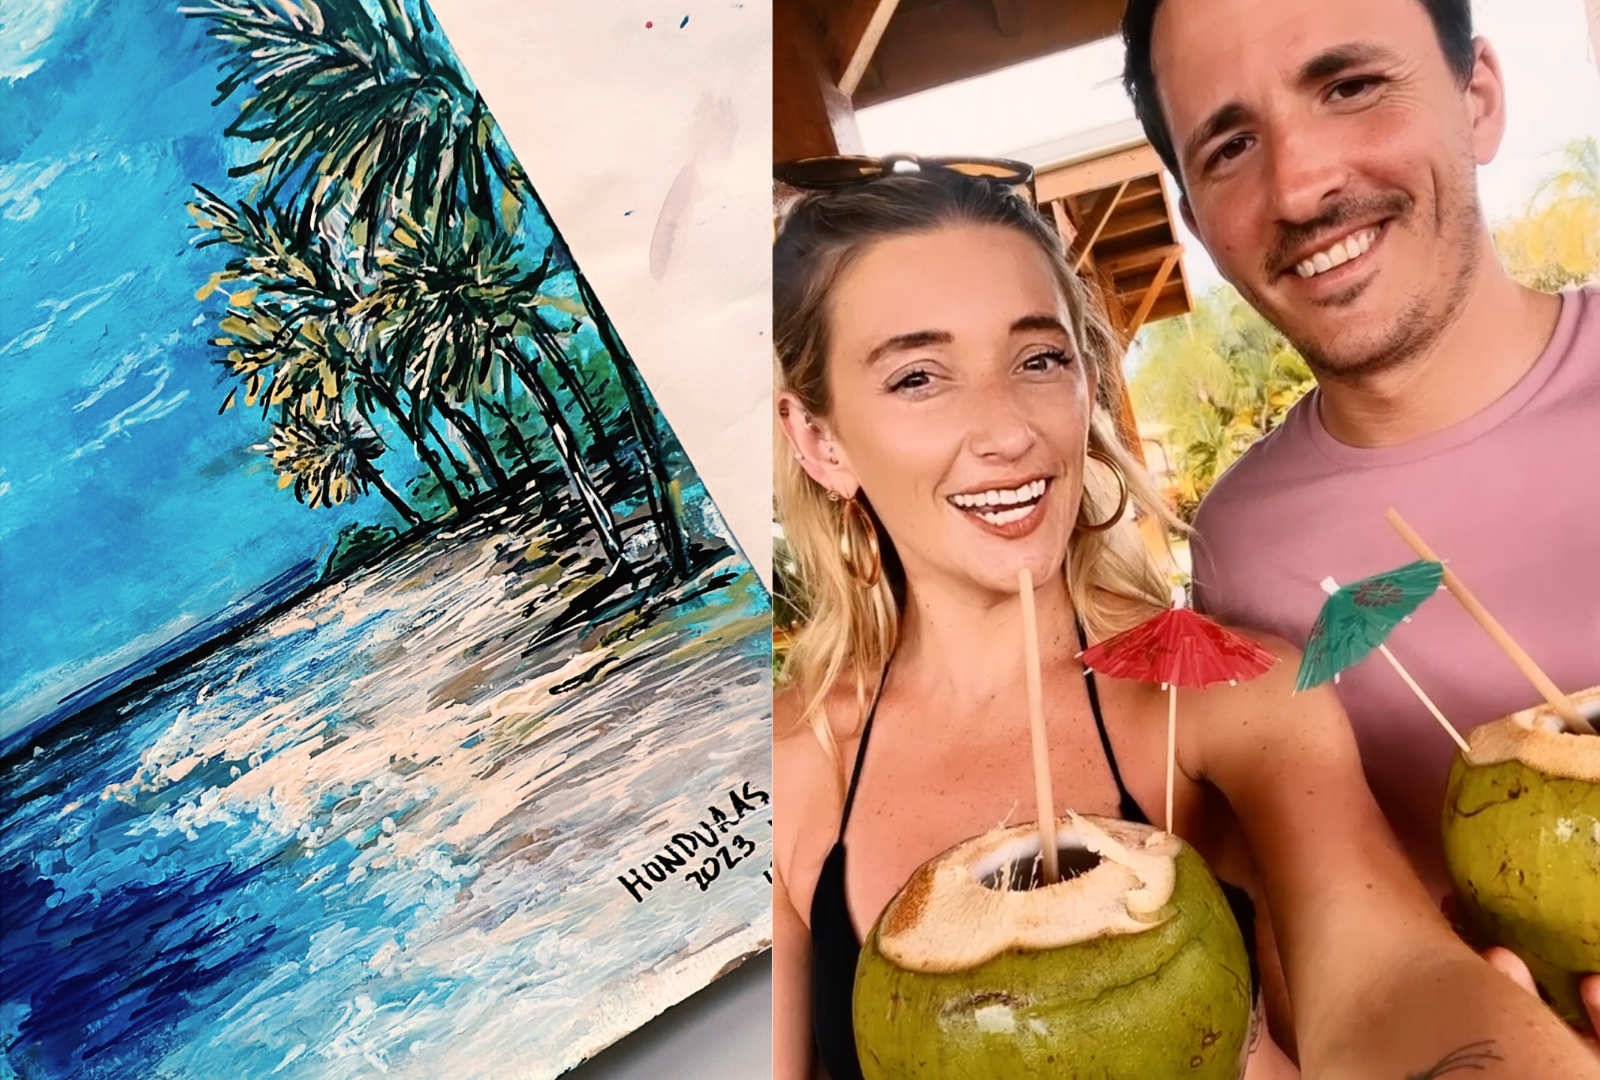 painting on vacation created art inspired by a norwegian cruise